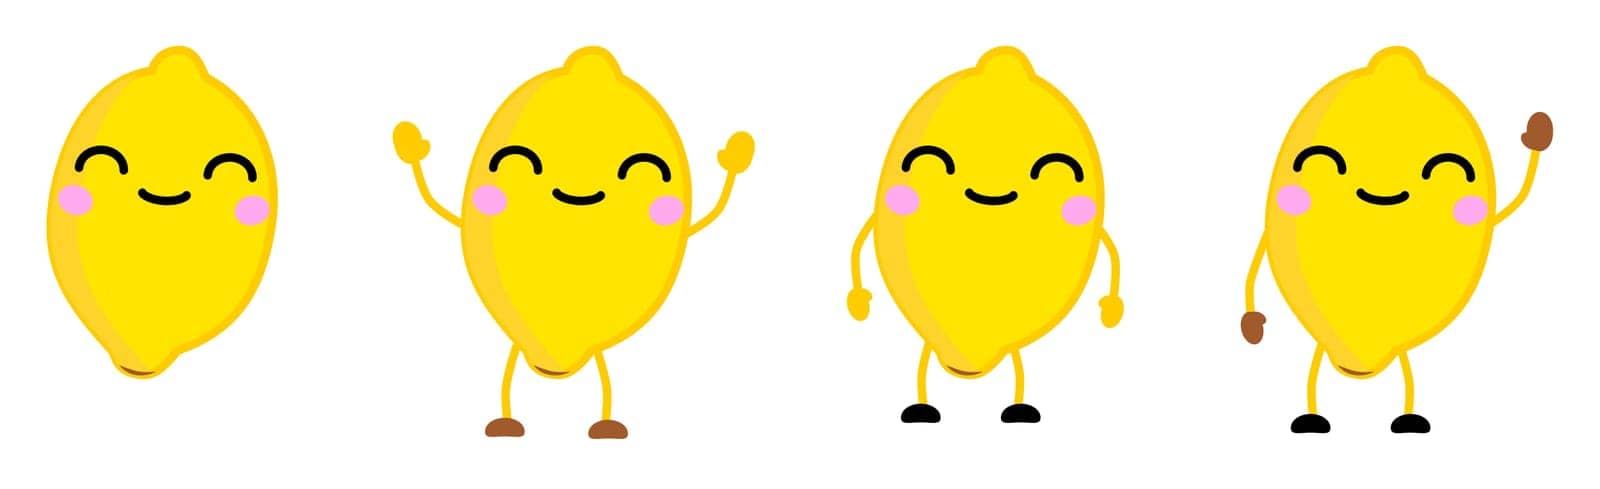 Cute kawaii style lemon fruit, eyes closed, smiling. Version with hands raised, down and waving. by Ivanko